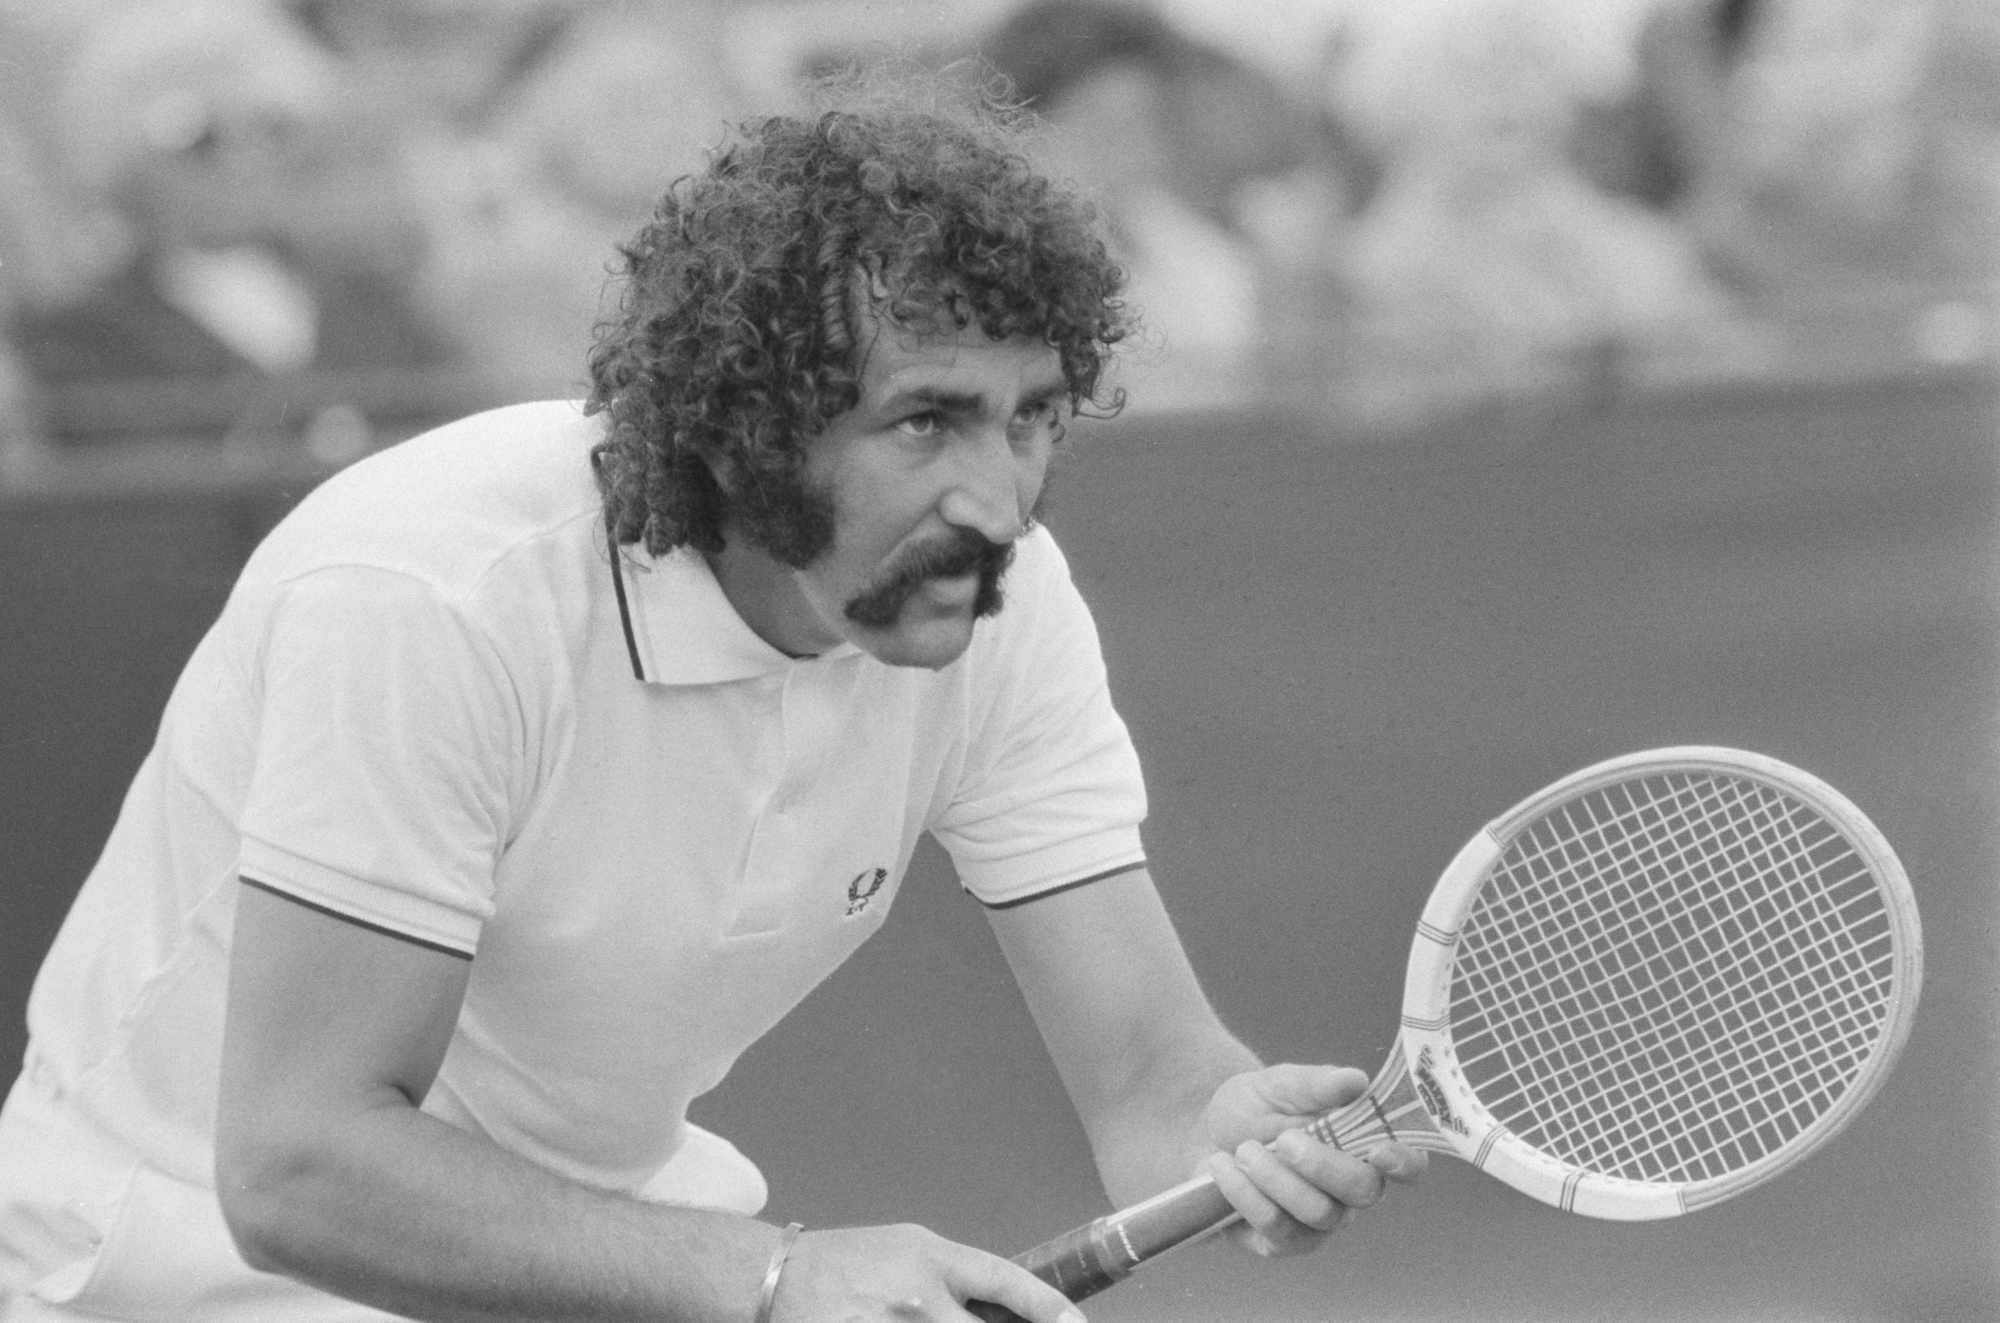 Ion Țiriac from Romania during the 1973 British Hard Court Championships in Bournemouth, UK. Photo: Evening Standard/Hulton Archive/Getty Images